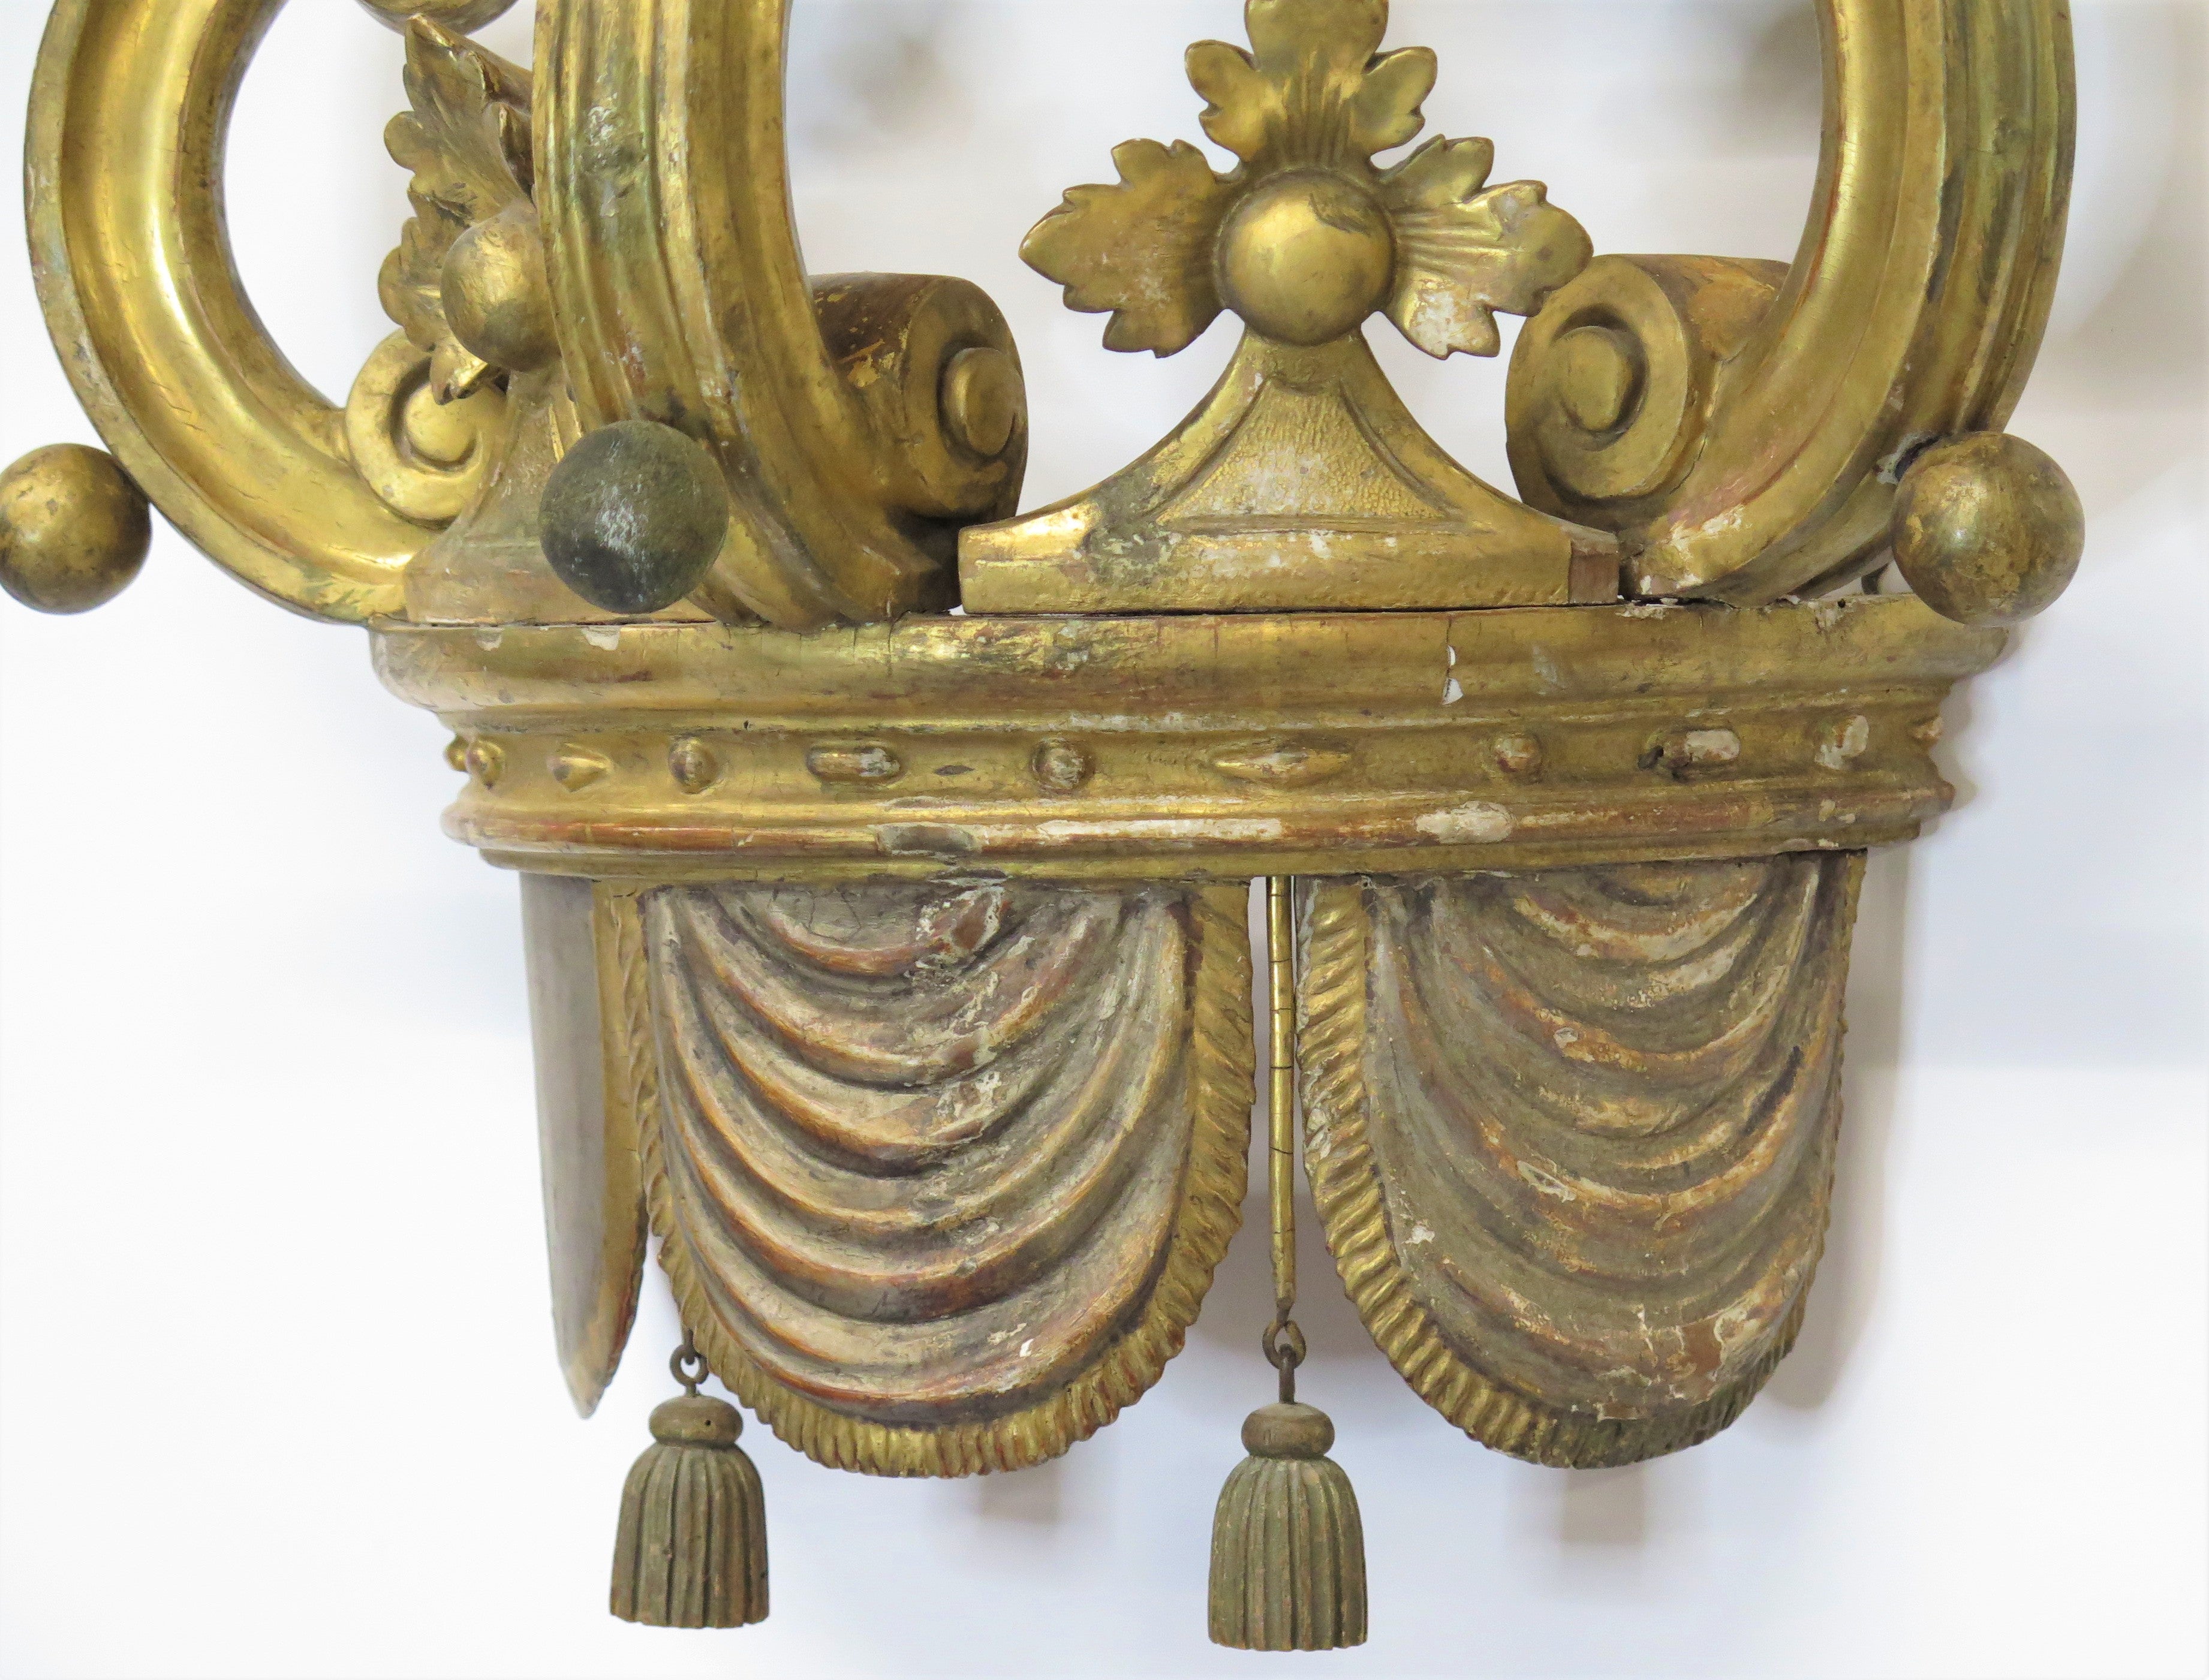 Paint and Polychromed gold and Silver Gilt Corona